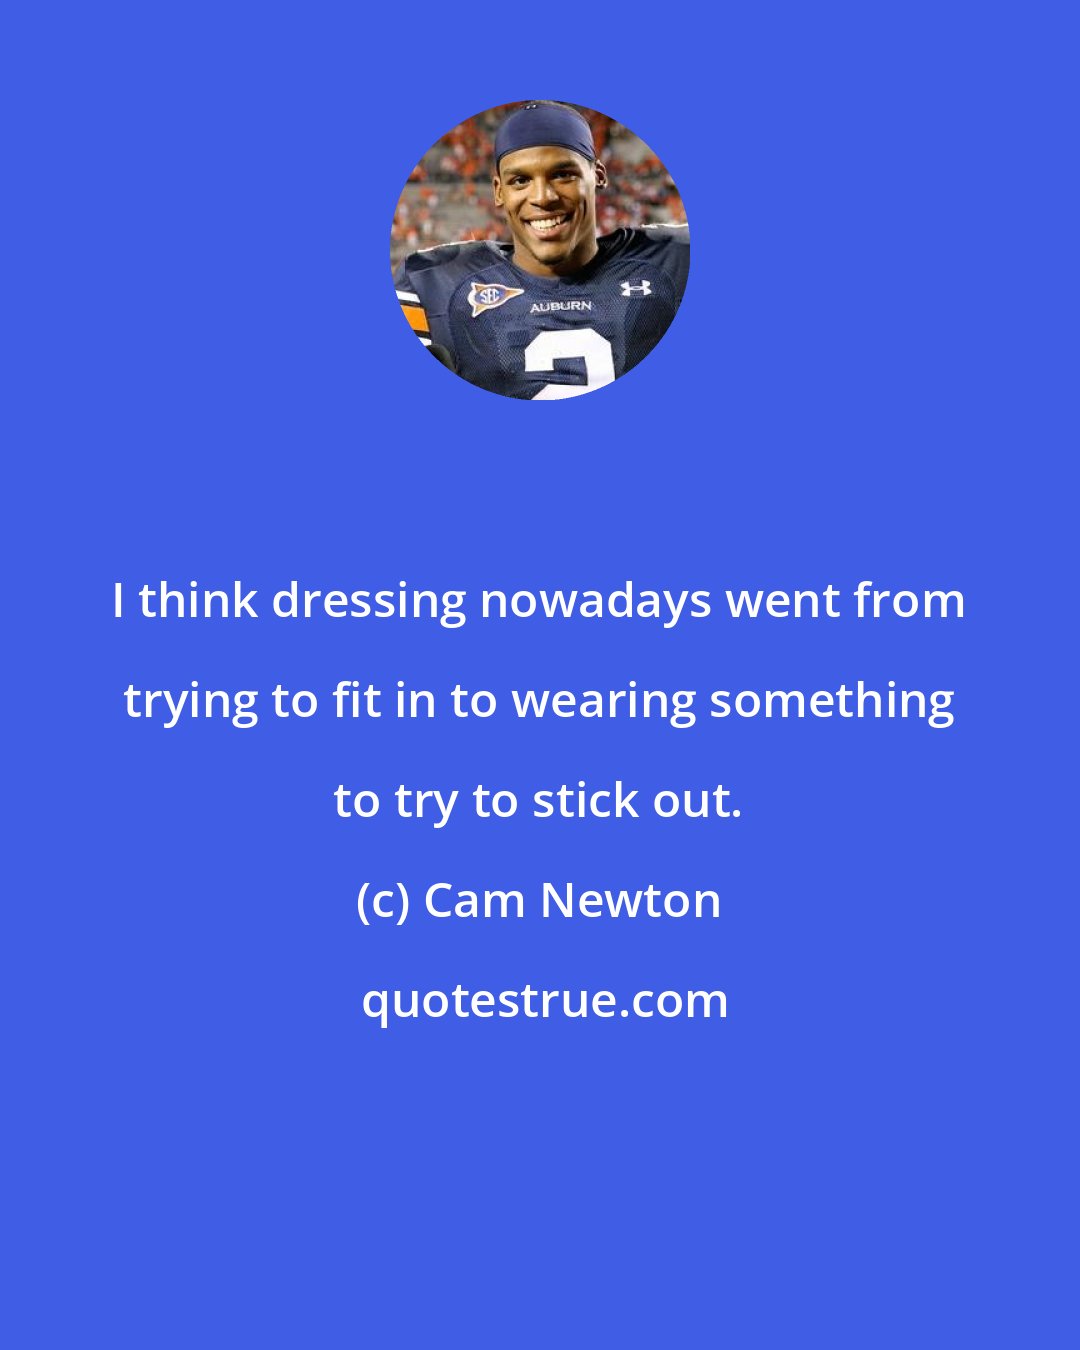 Cam Newton: I think dressing nowadays went from trying to fit in to wearing something to try to stick out.